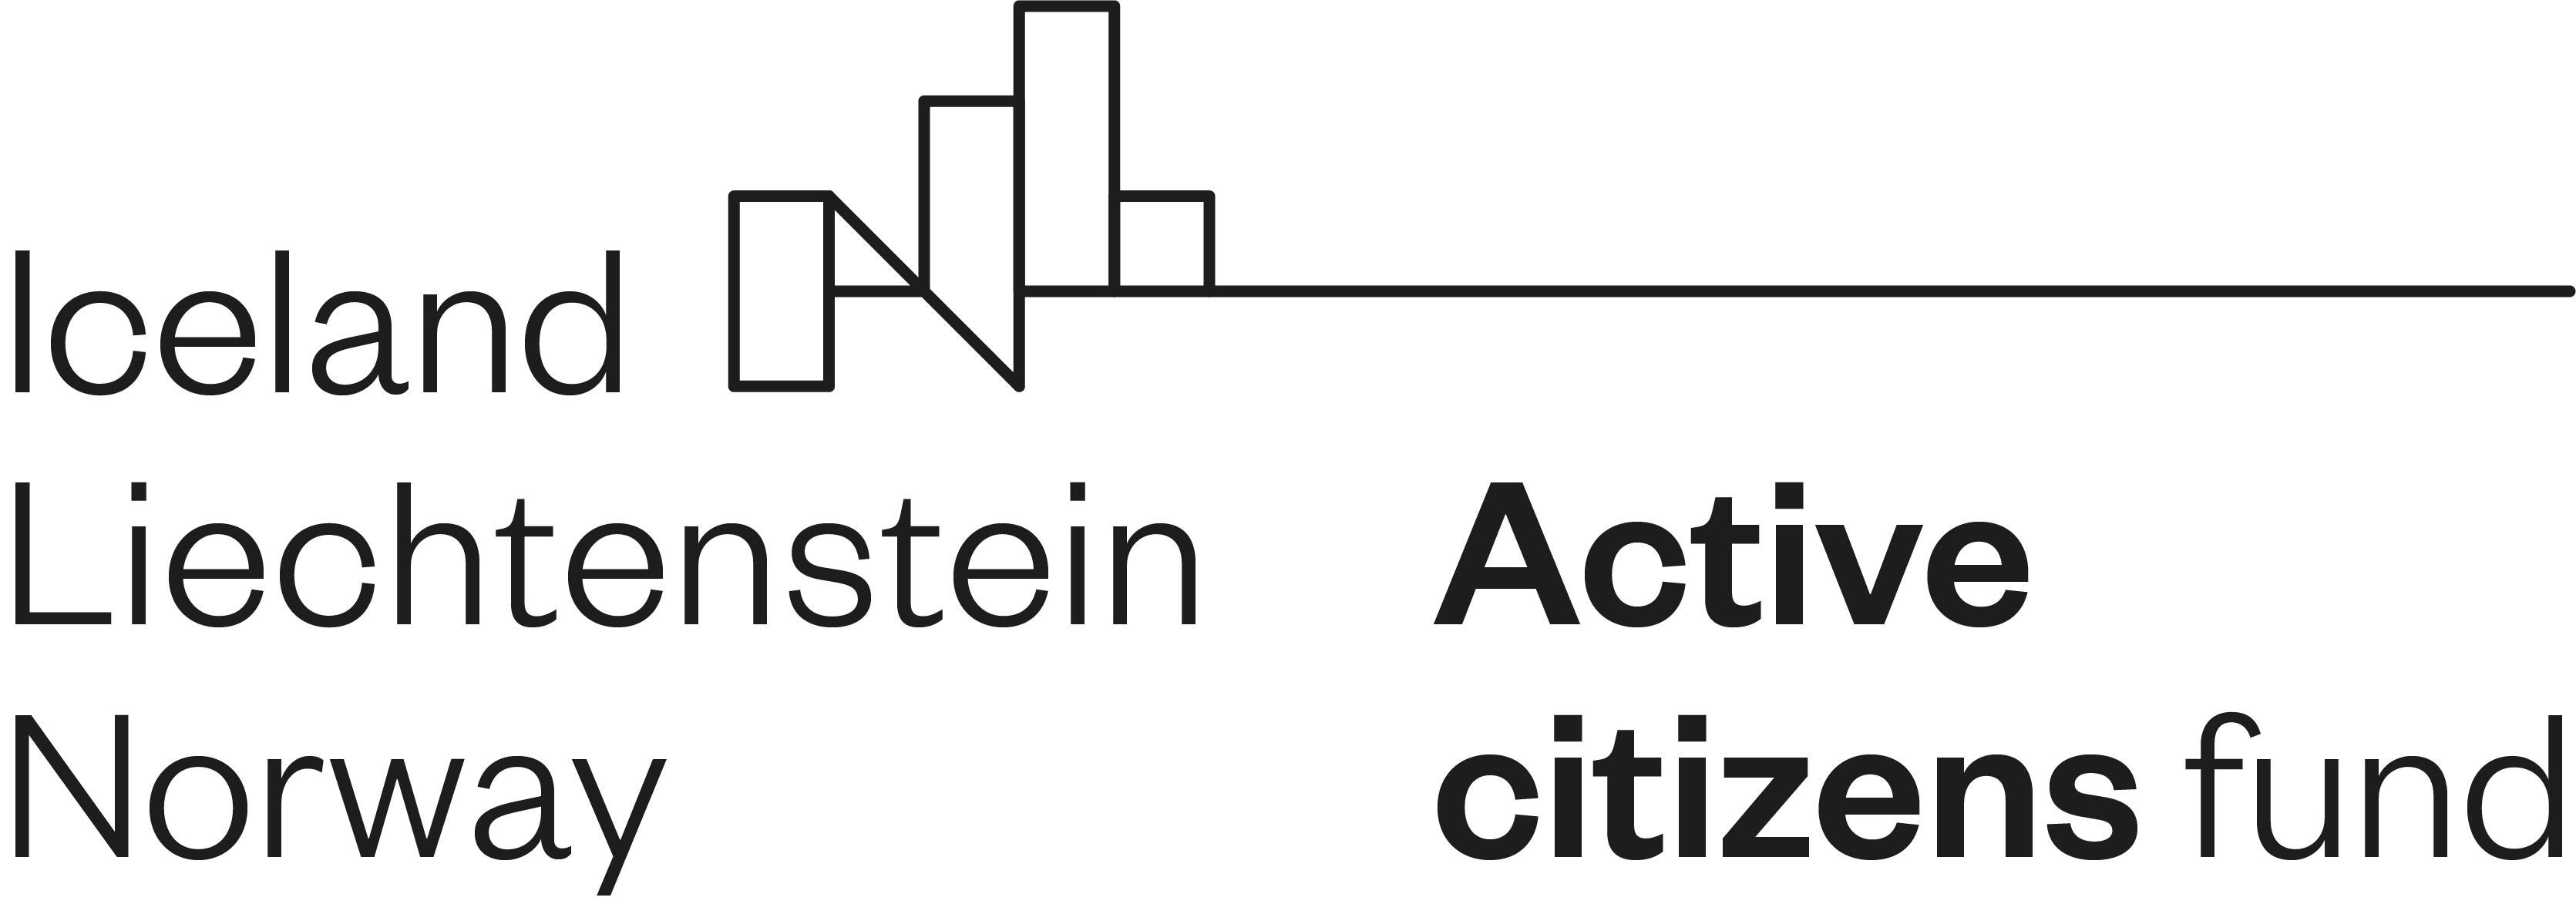 Active-citizens-fund@4x.png